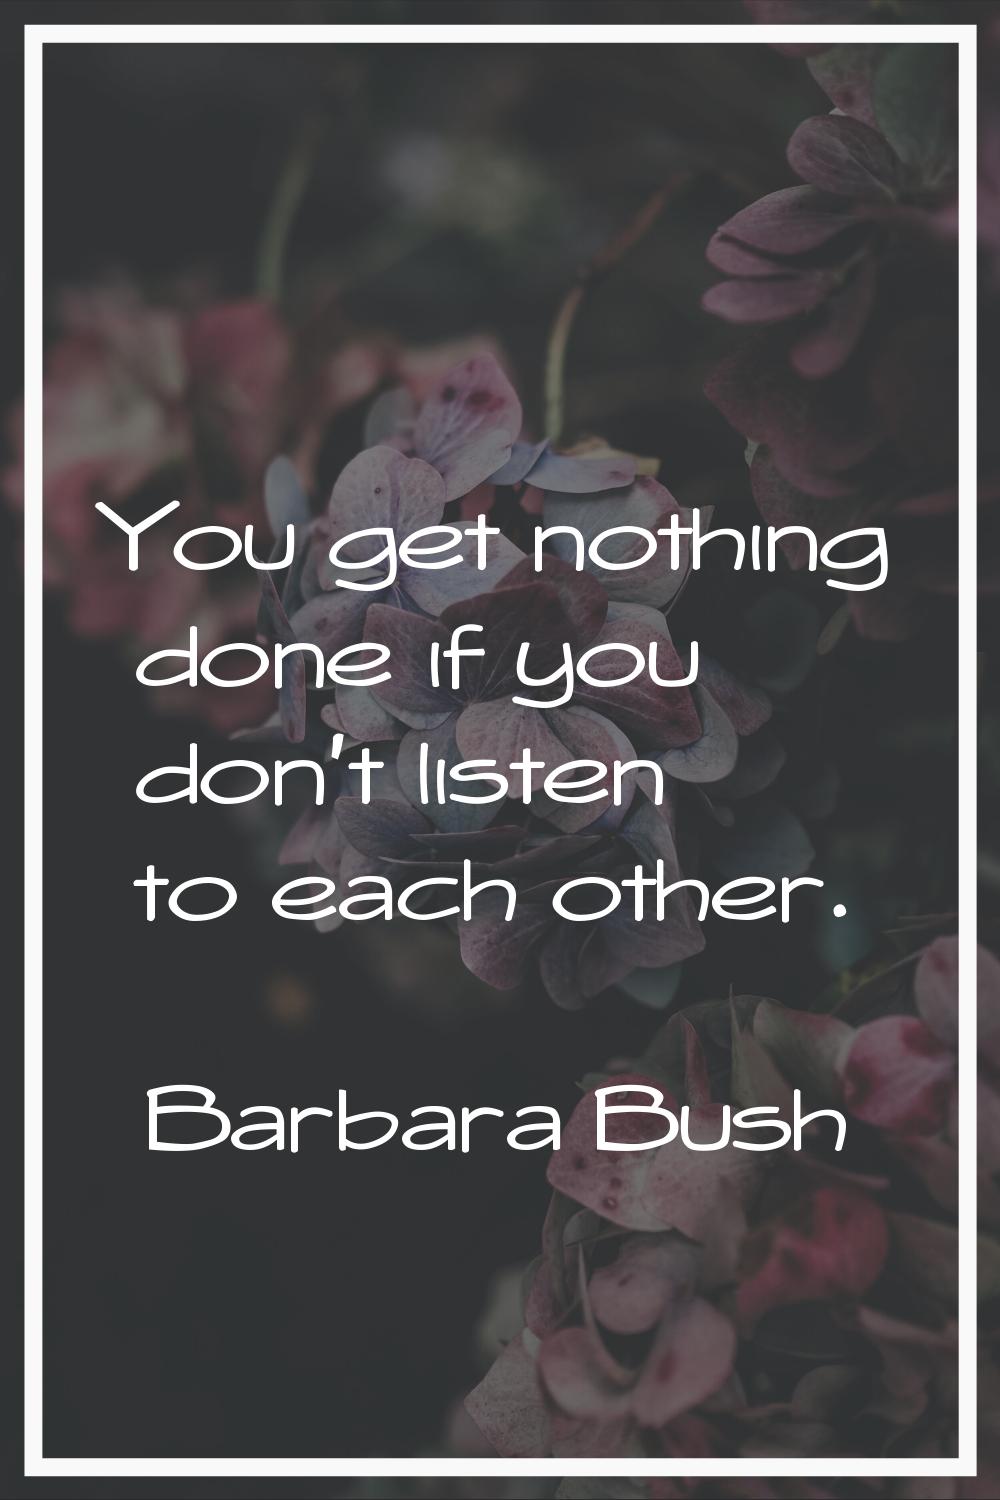 You get nothing done if you don't listen to each other.